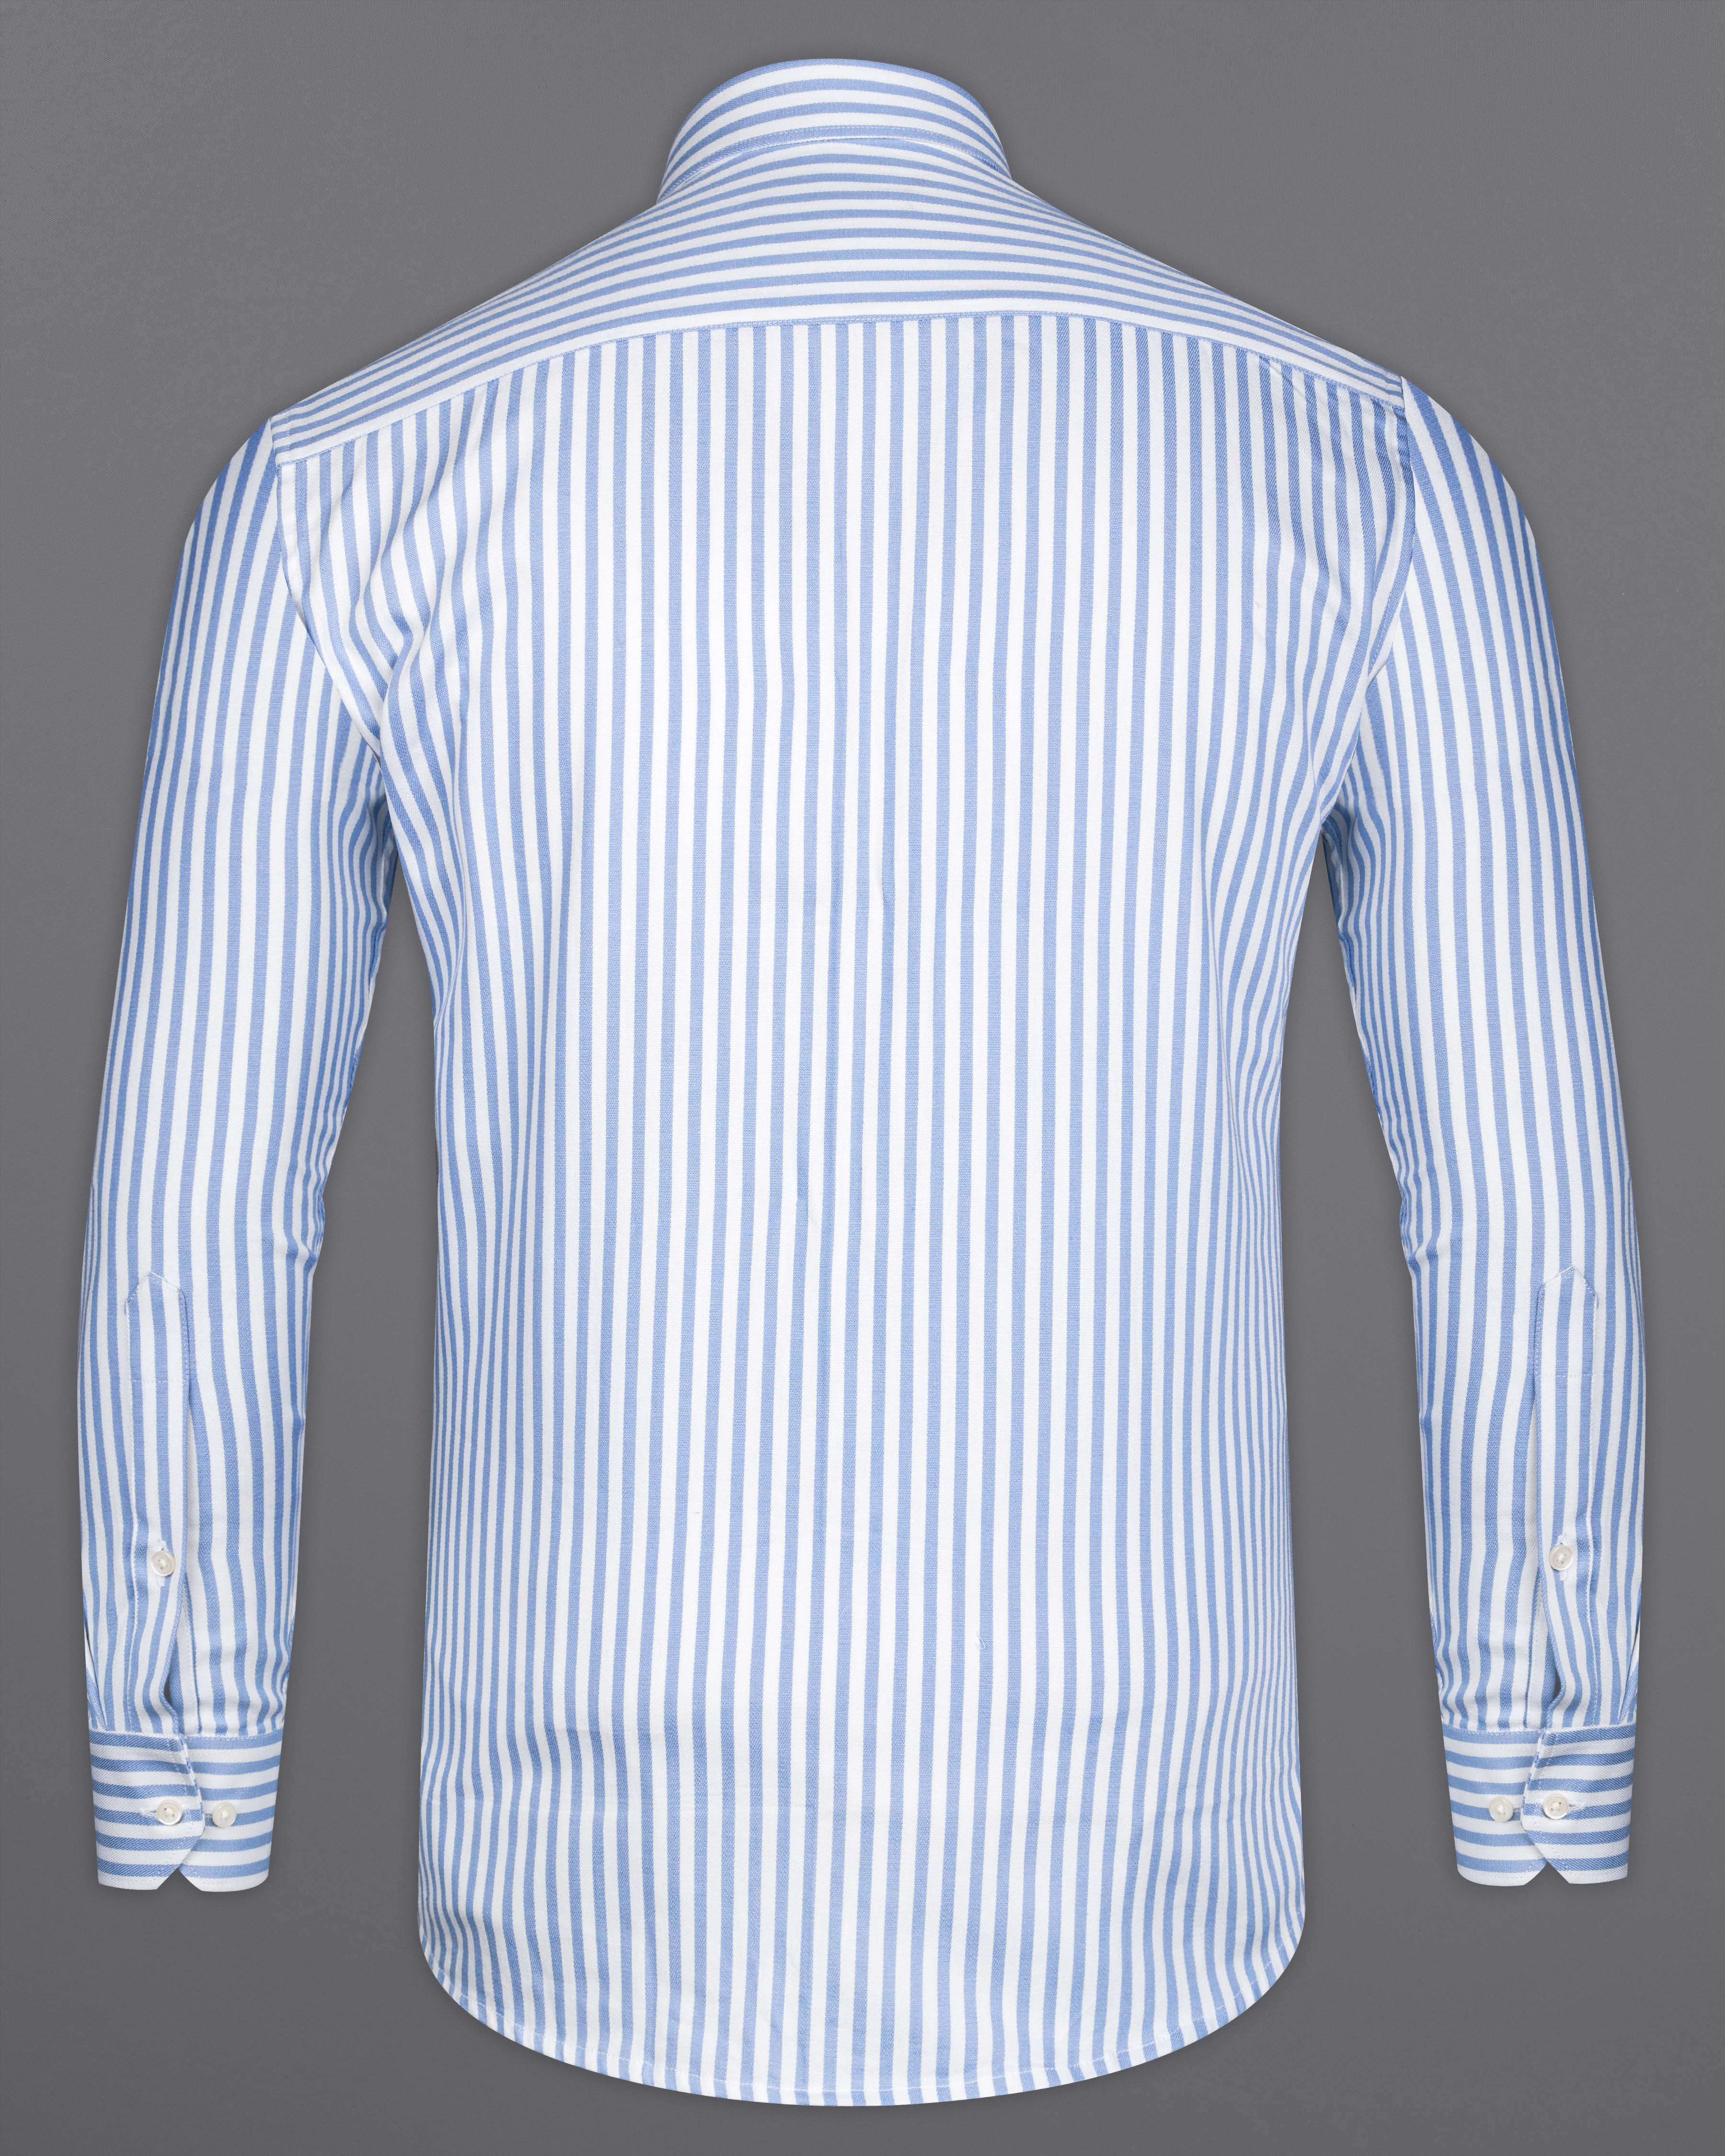 Pale Cerulean Blue with White Striped Royal Oxford Shirt 9944-BD-38, 9944-BD-H-38, 9944-BD-39, 9944-BD-H-39, 9944-BD-40, 9944-BD-H-40, 9944-BD-42, 9944-BD-H-42, 9944-BD-44, 9944-BD-H-44, 9944-BD-46, 9944-BD-H-46, 9944-BD-48, 9944-BD-H-48, 9944-BD-50, 9944-BD-H-50, 9944-BD-52, 9944-BD-H-52